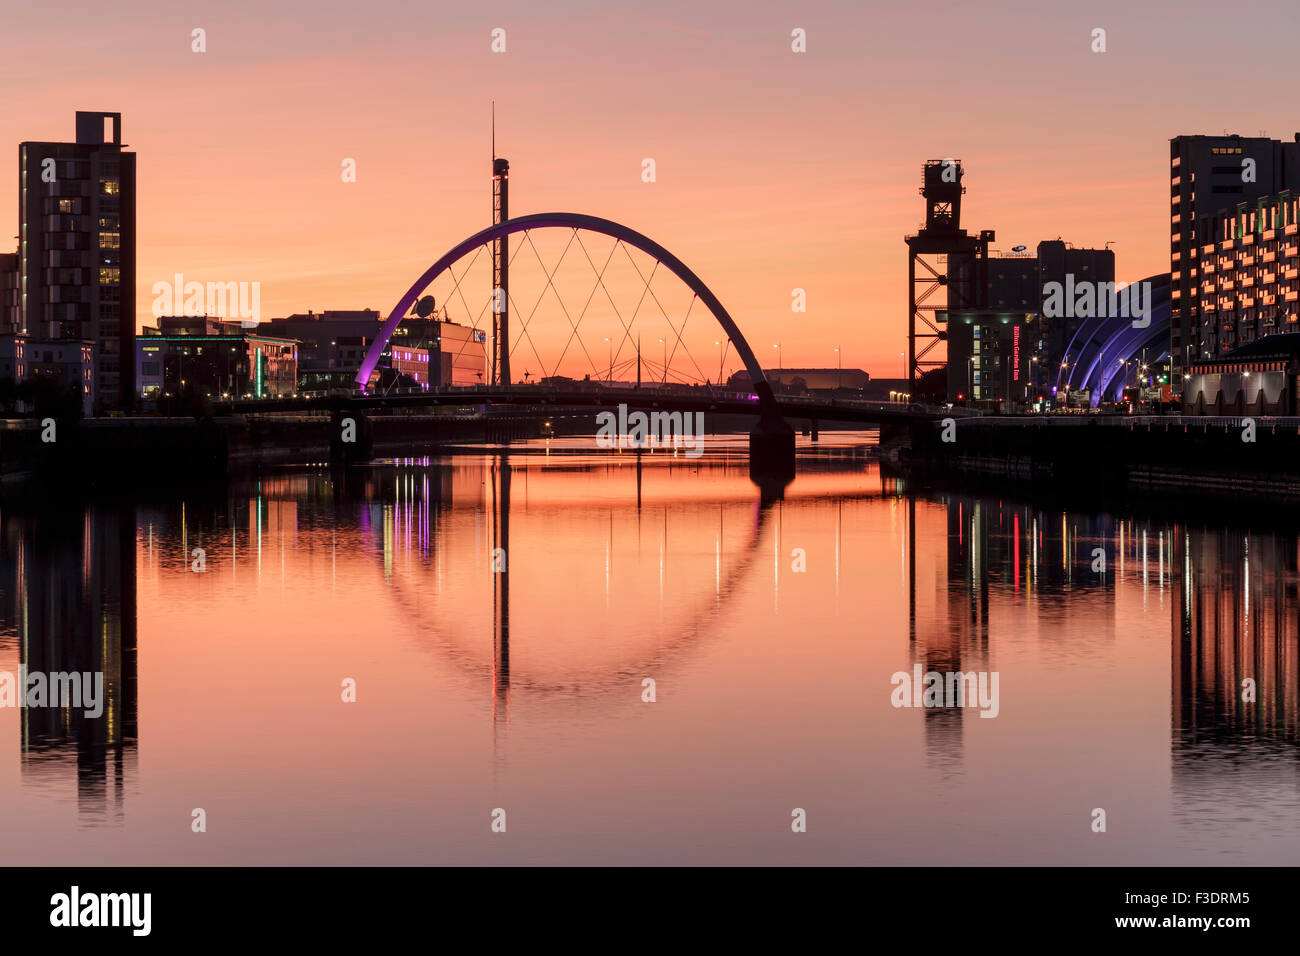 The Clyde Arc Bridge reflected in the River Clyde at sunset, Glasgow, Scotland, UK Stock Photo